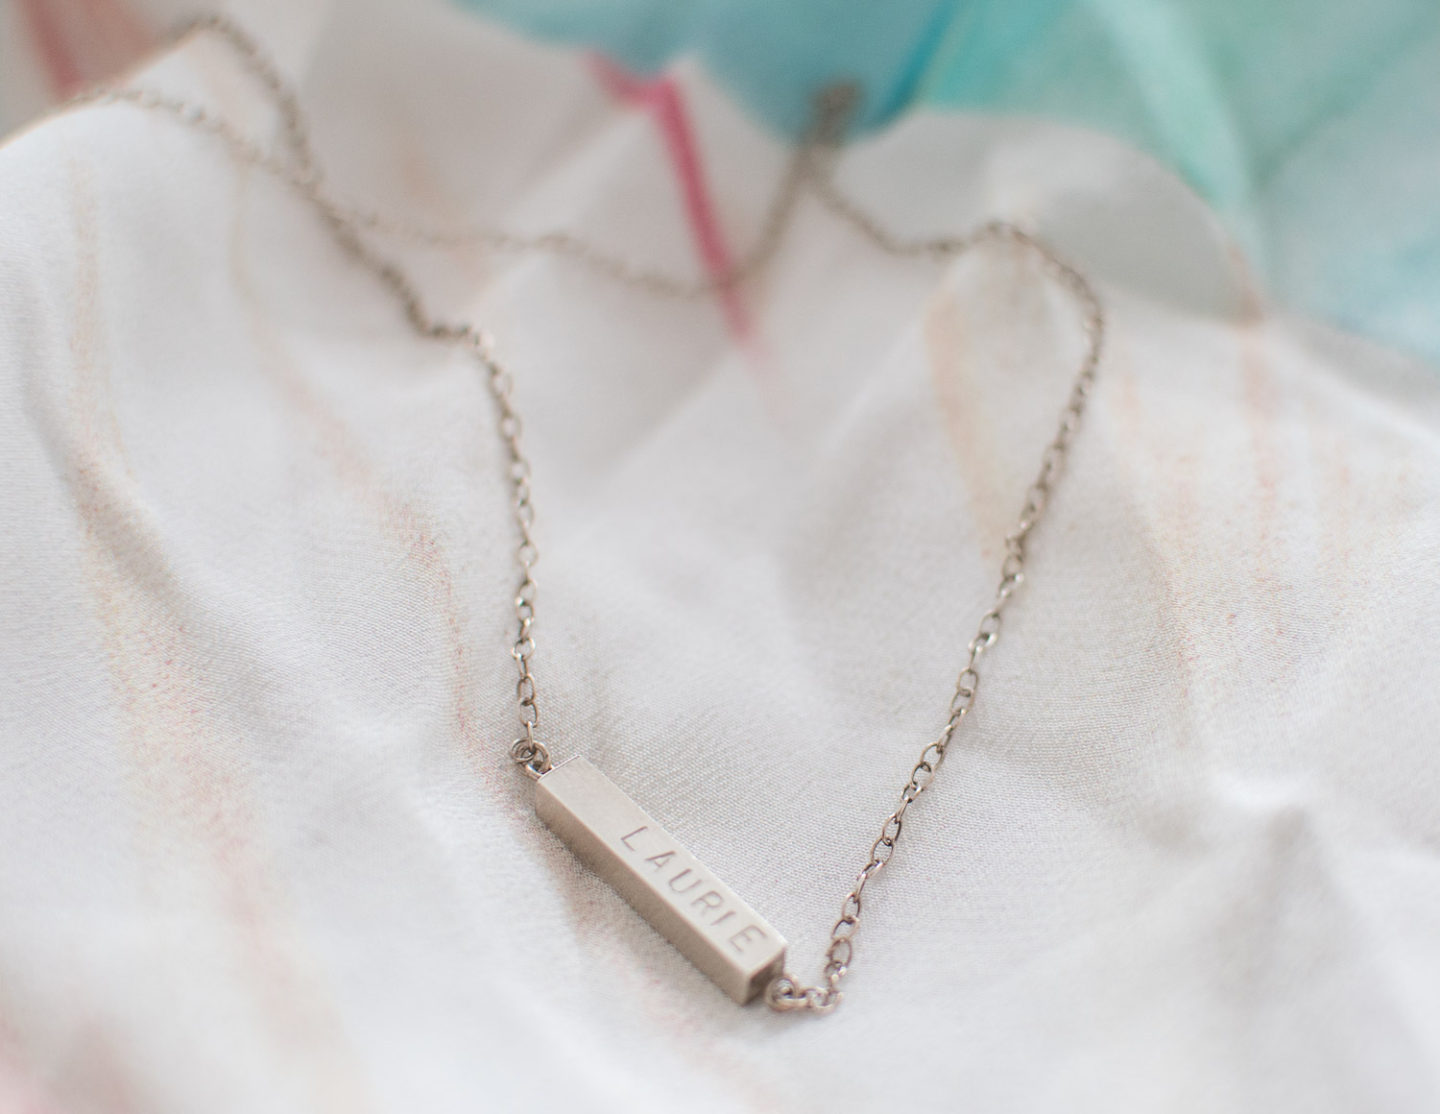 Daisy & Laurie necklace from ethical jewellery brand Kate Wainwright